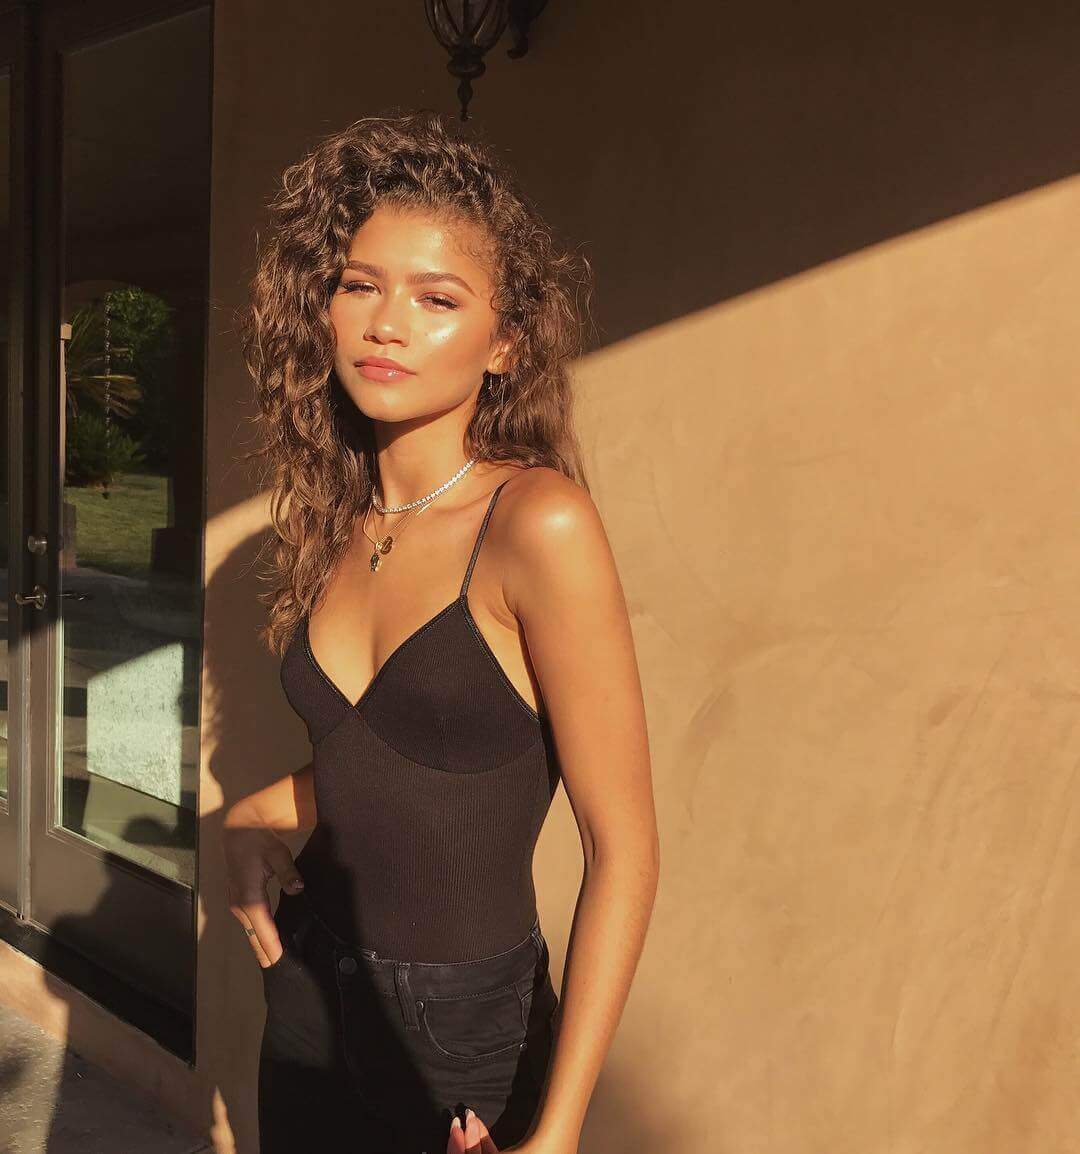 61 Hottest Zendaya Big Butt Pictures Are Going To Make You Want Her Badly | Best Of Comic Books